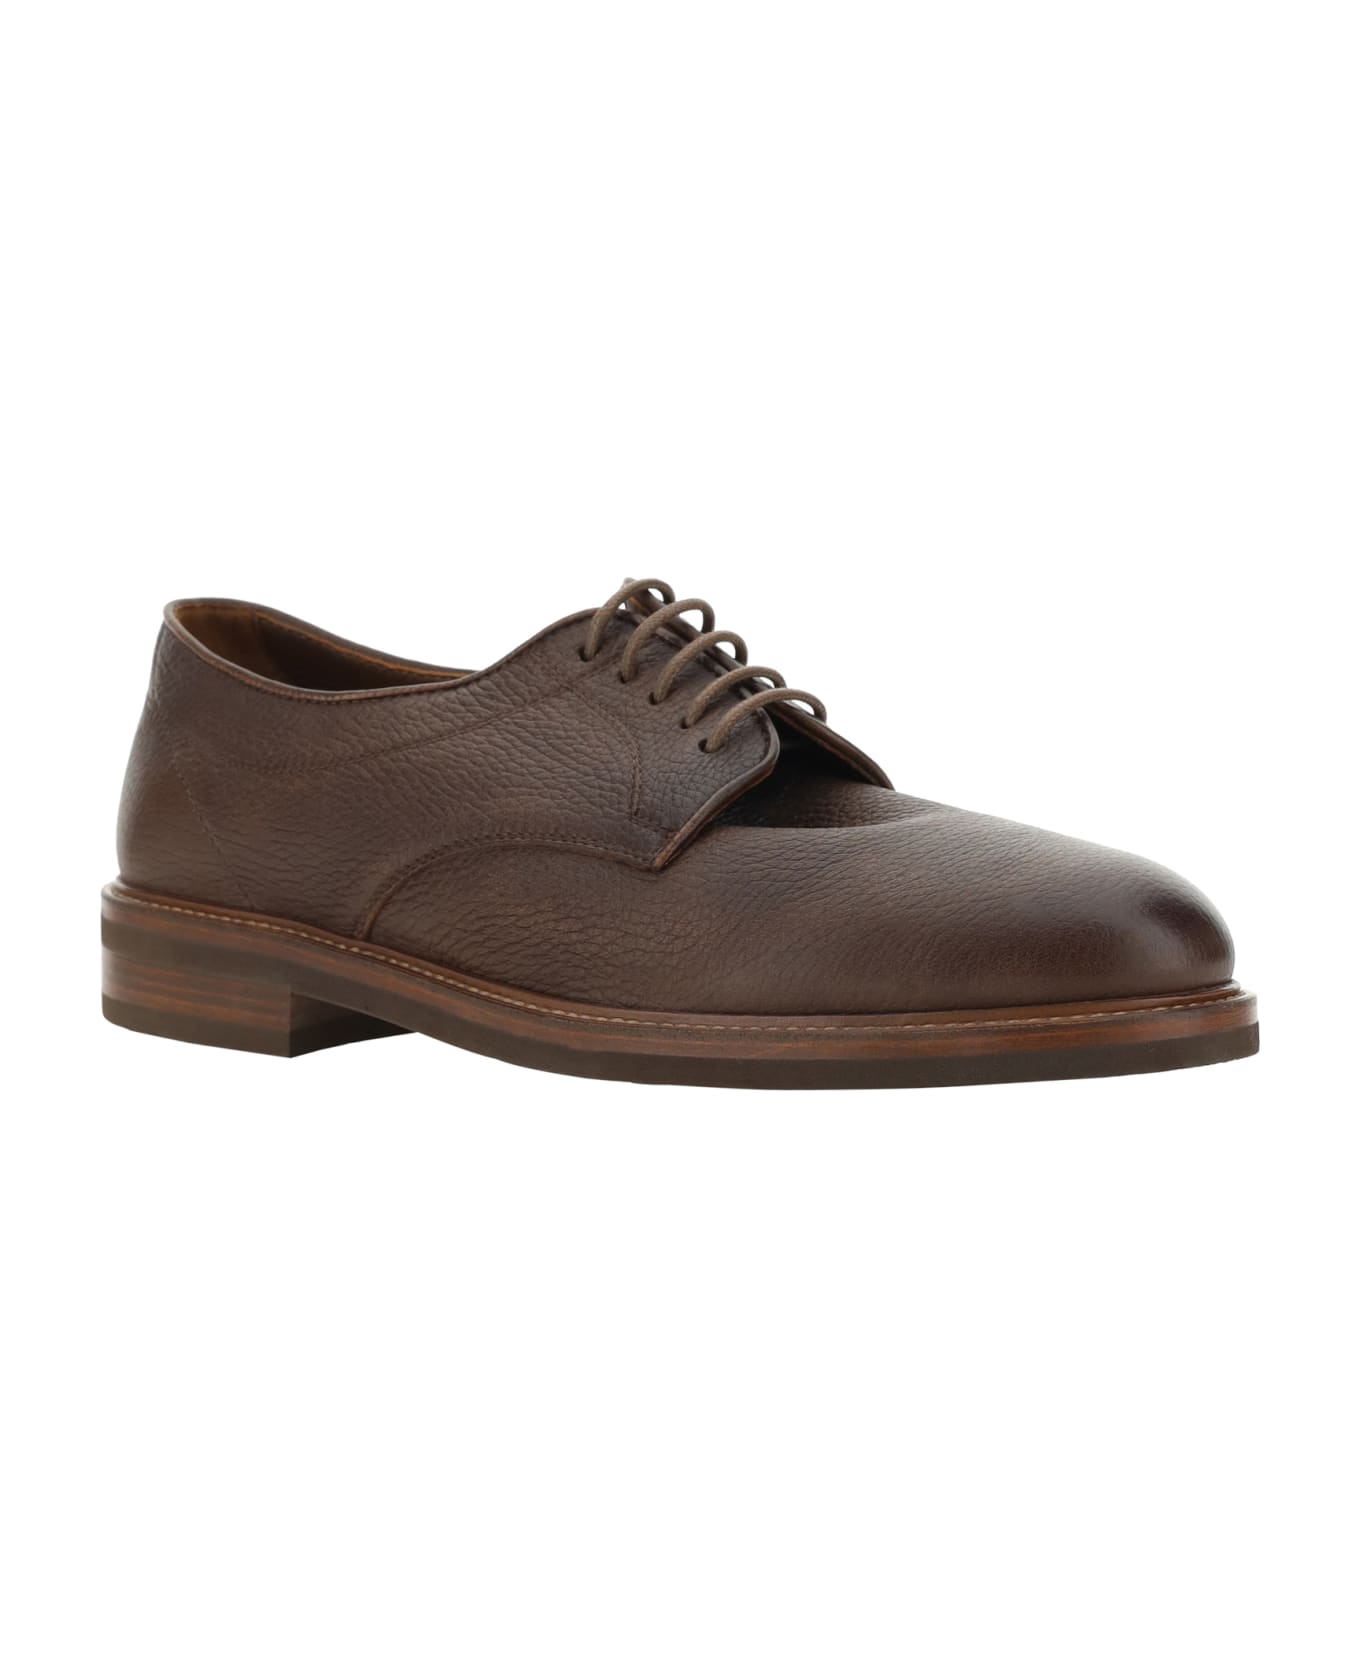 Brunello Cucinelli Lace-up Shoes Heelys - Tabacco